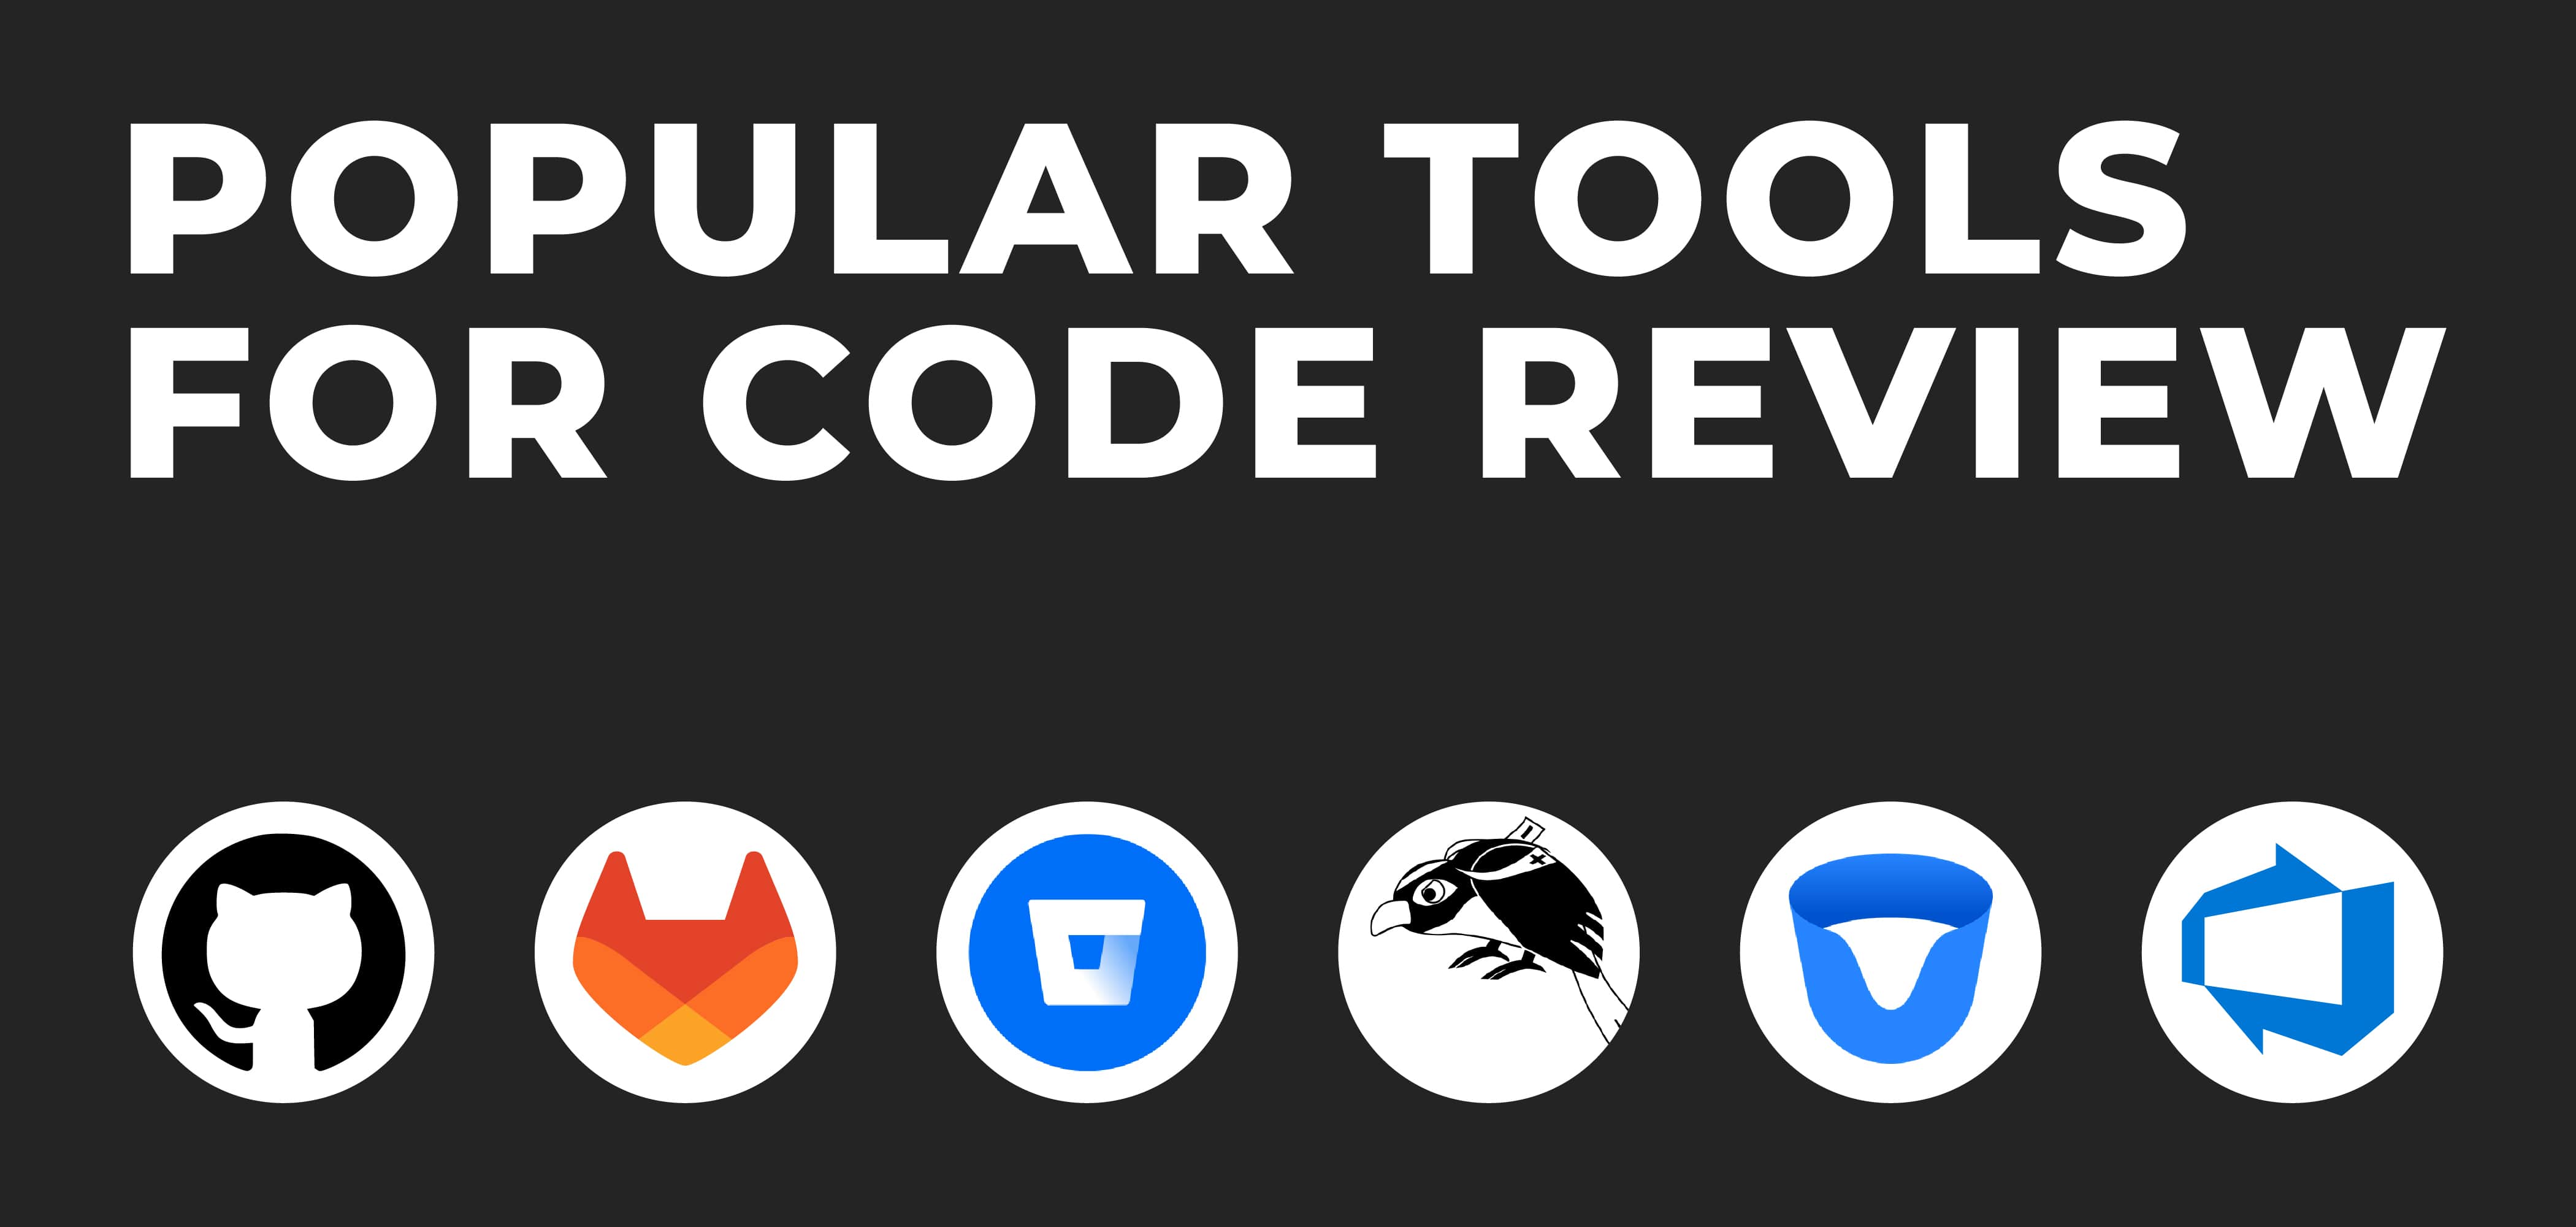 Good code practices include matching review tools